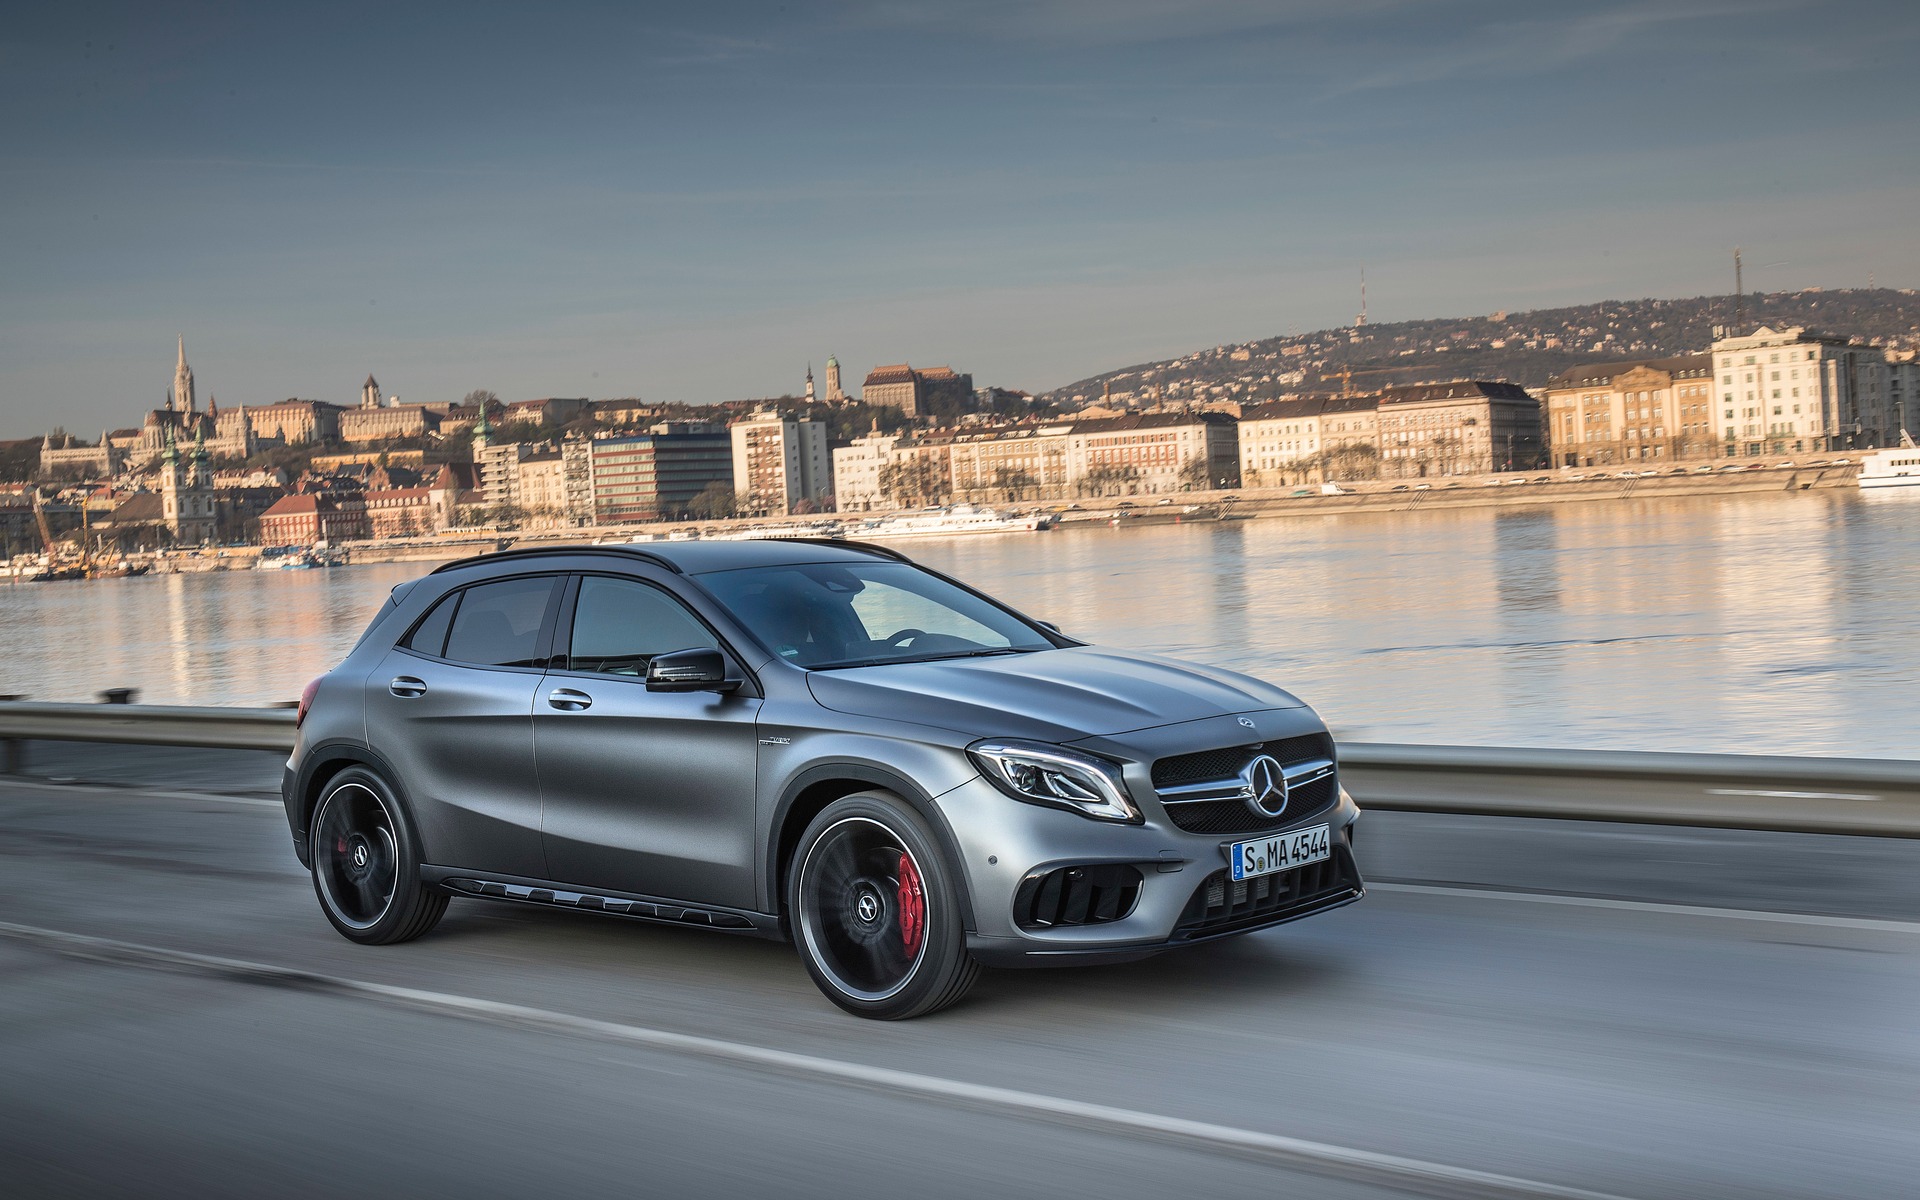 18 Mercedes Benz Gla Gla 250 4matic Specifications The Car Guide